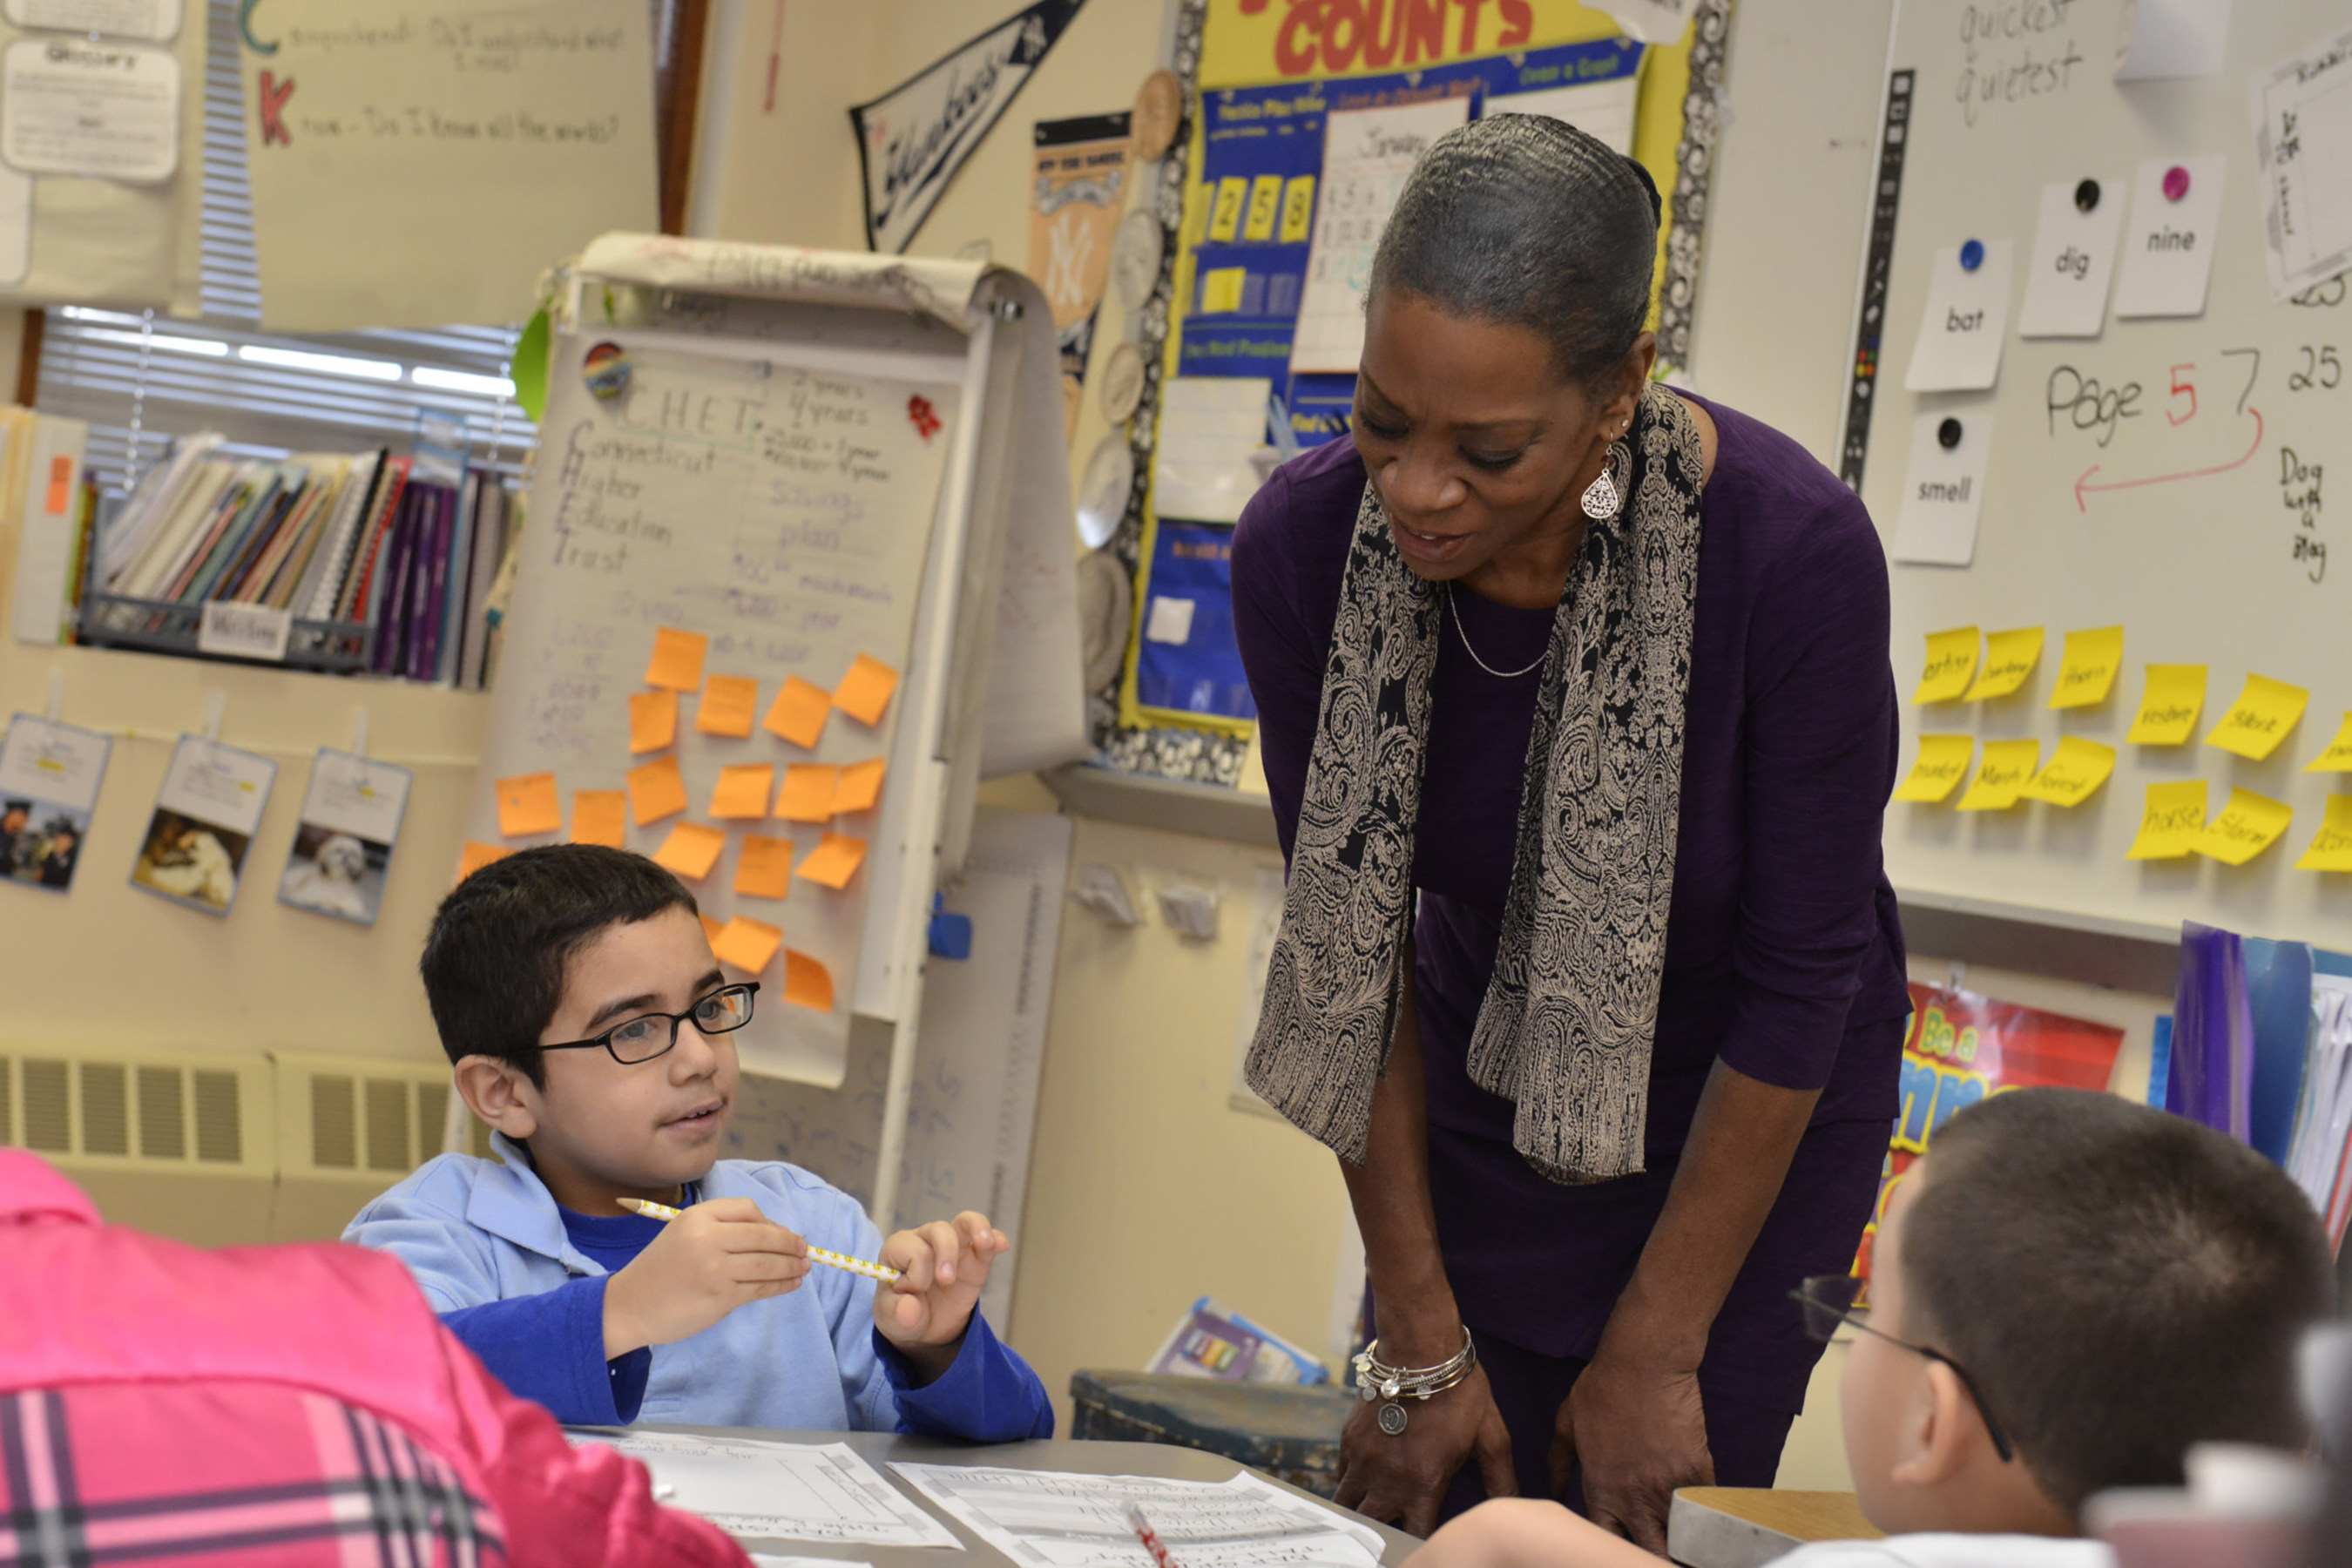 Connecticut State Treasurer Denise L. Nappier visits students at Vance Village Elementary School to officially kick-off the 2015 CHET Dream Big! Competition, a drawing and essay competition for Connecticut's K-8 grade students.  Photo Credit: Nick Caito